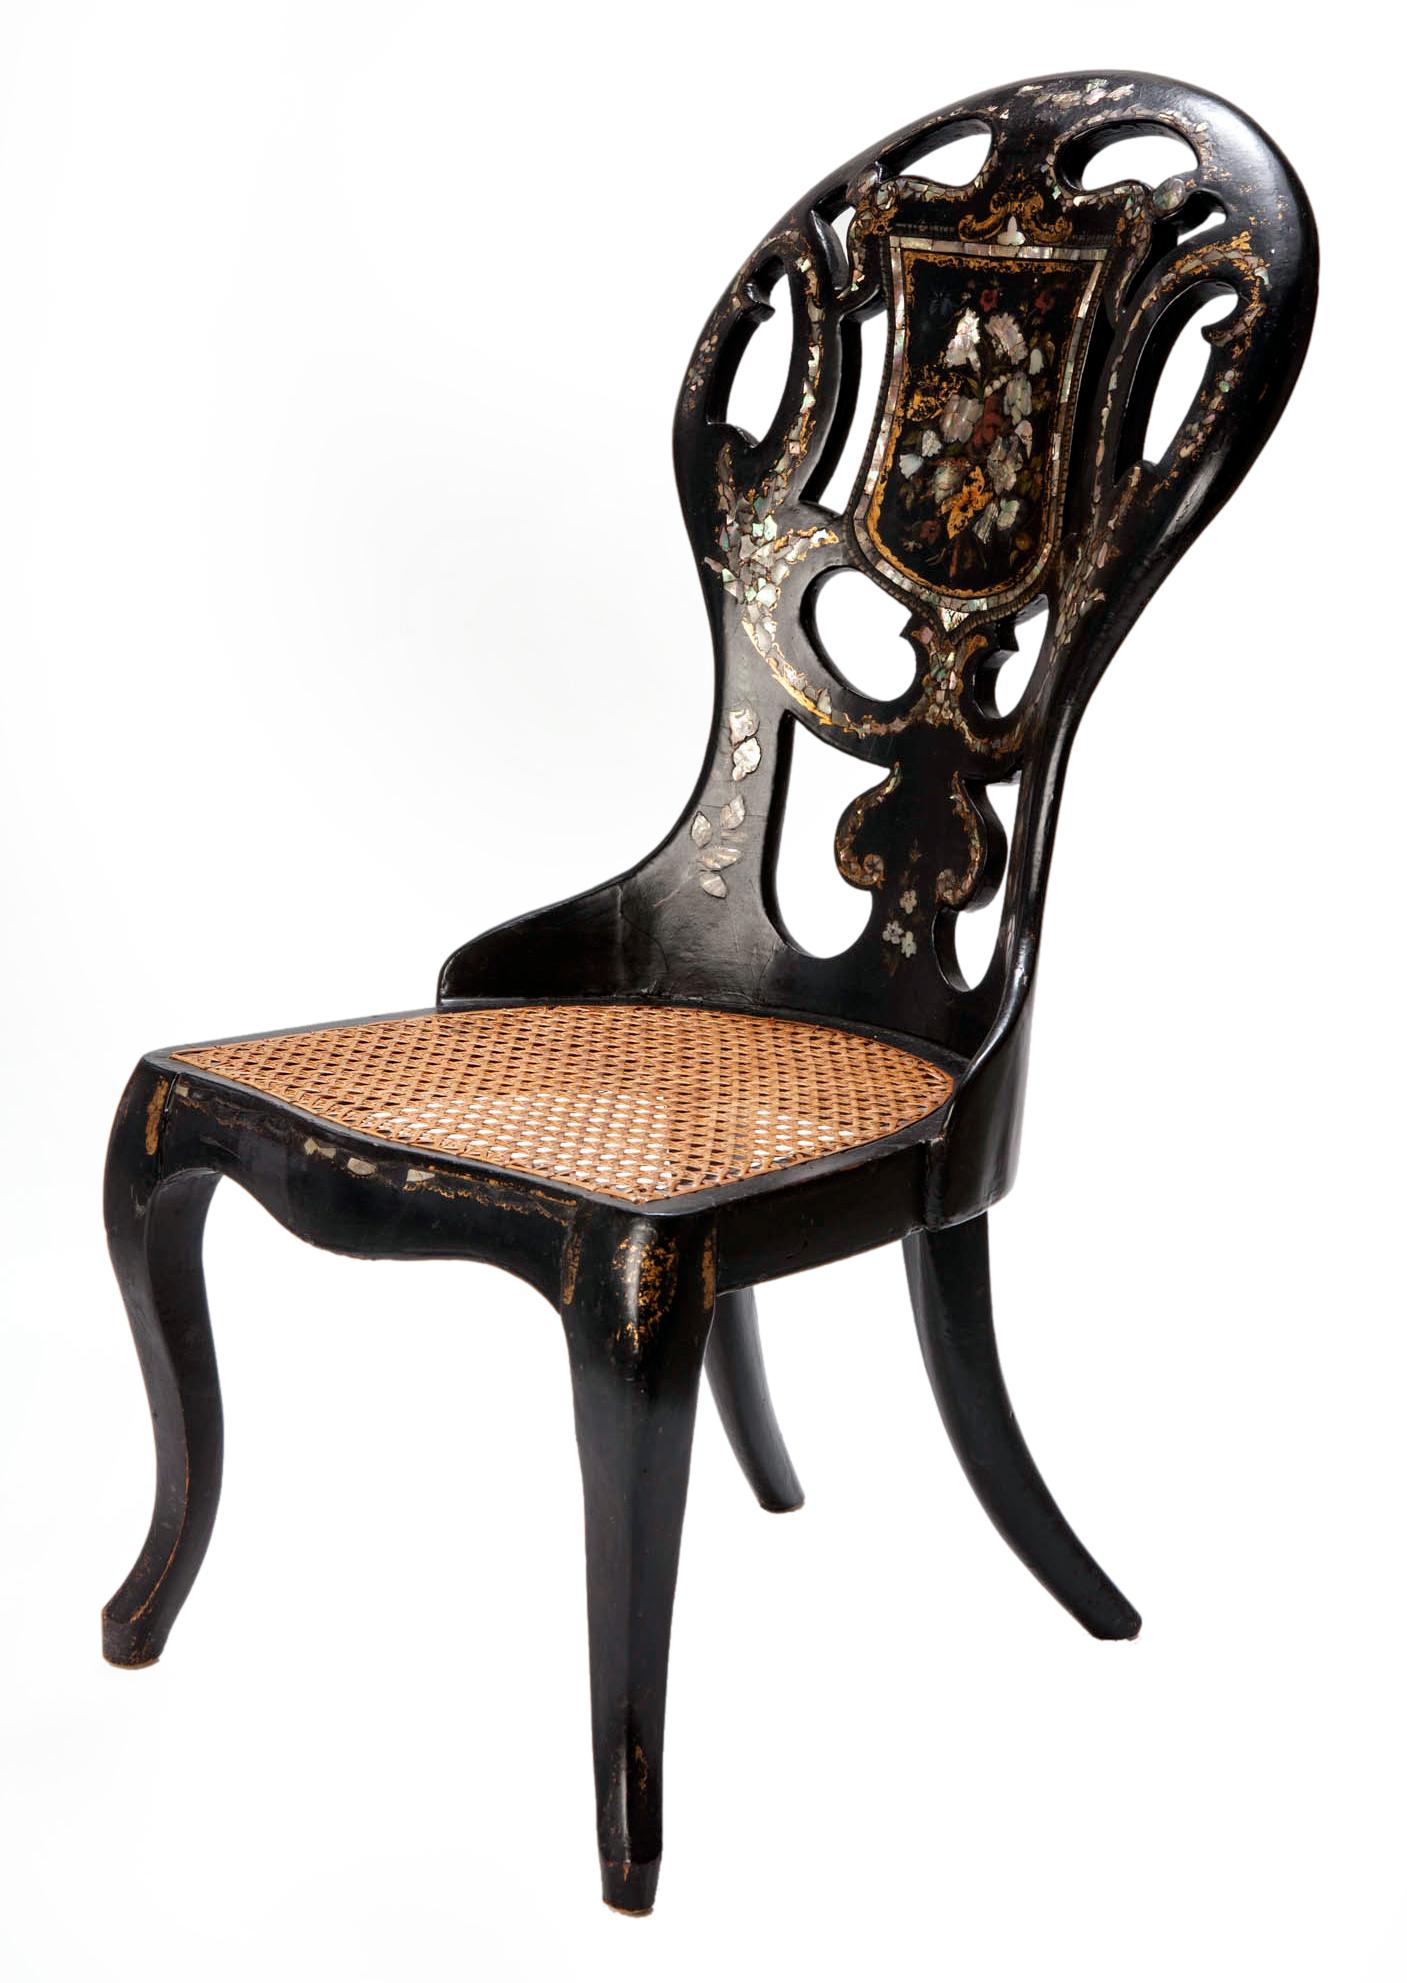 A very fine wood and papier mâché English chair with inlaid & hand painted back & legs. Gilt accents with mother of pearl inlay, buffed to a warm polish.
The back depicts an abstract floral design. 
The original hand caned seat is in excellent